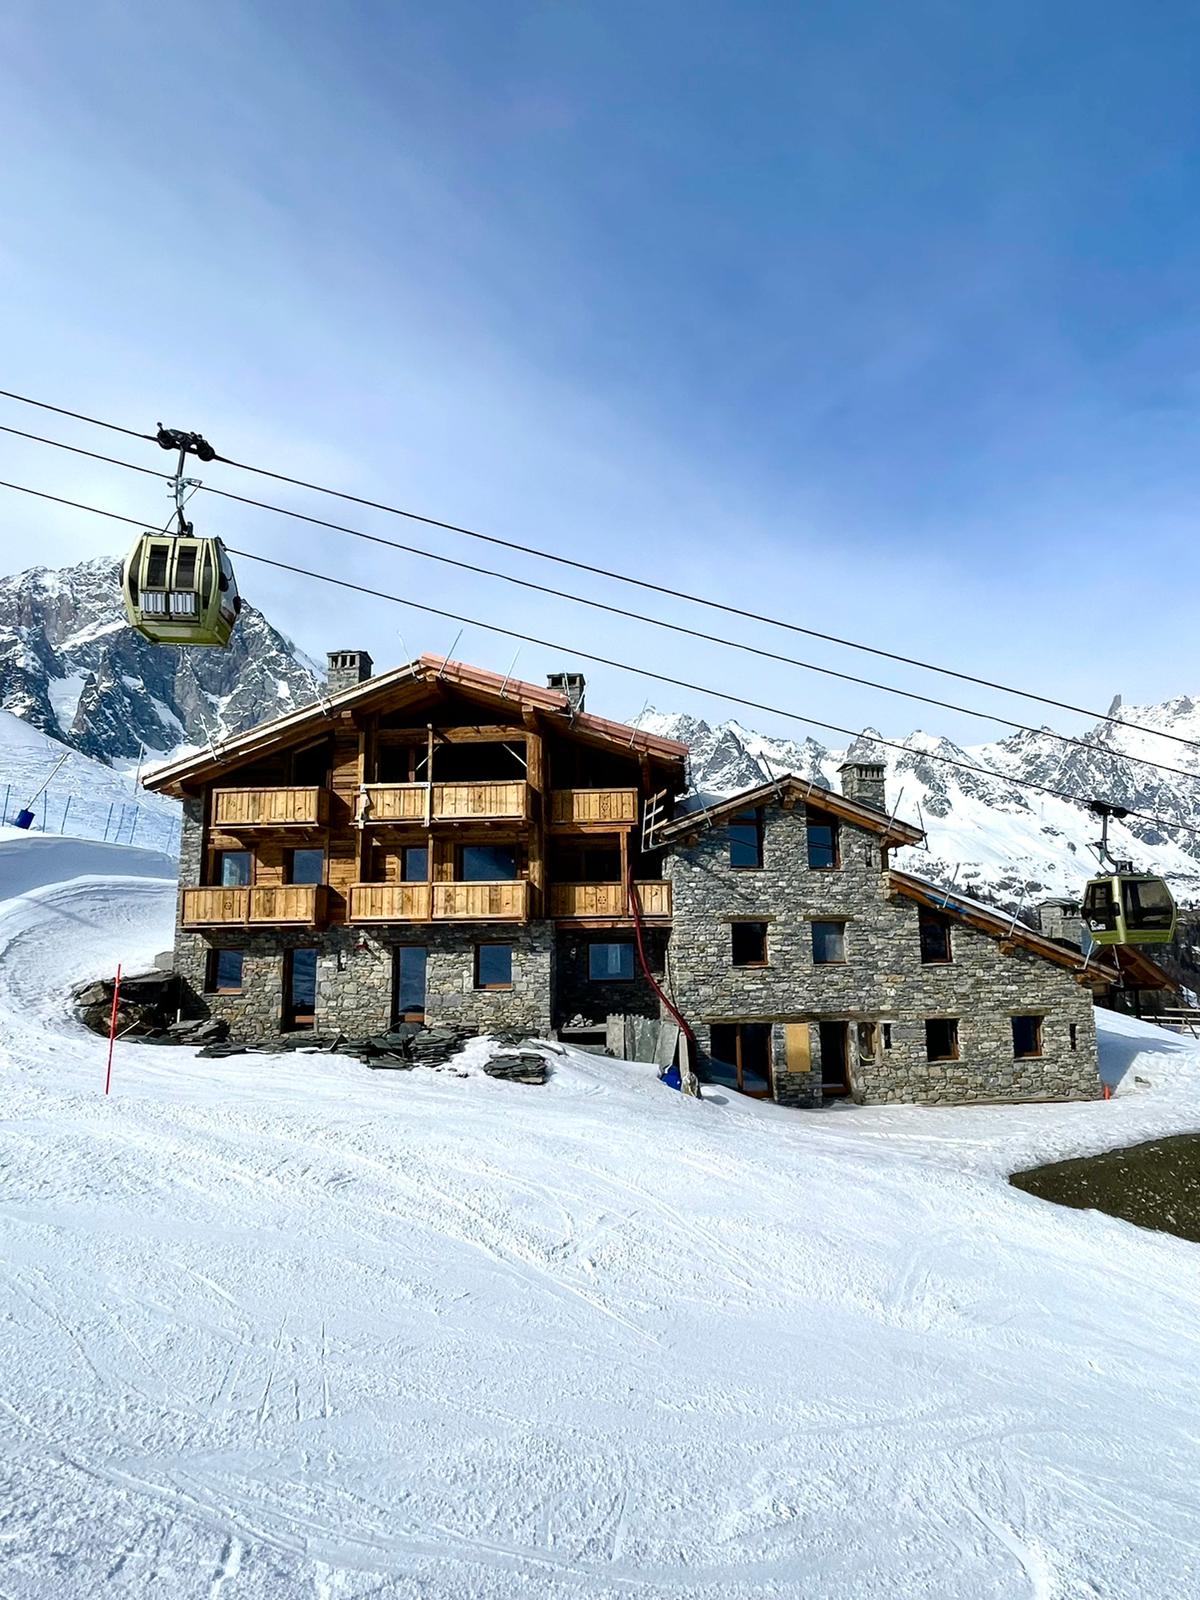 Newly built chalet on the ski slopes of Courmayeur